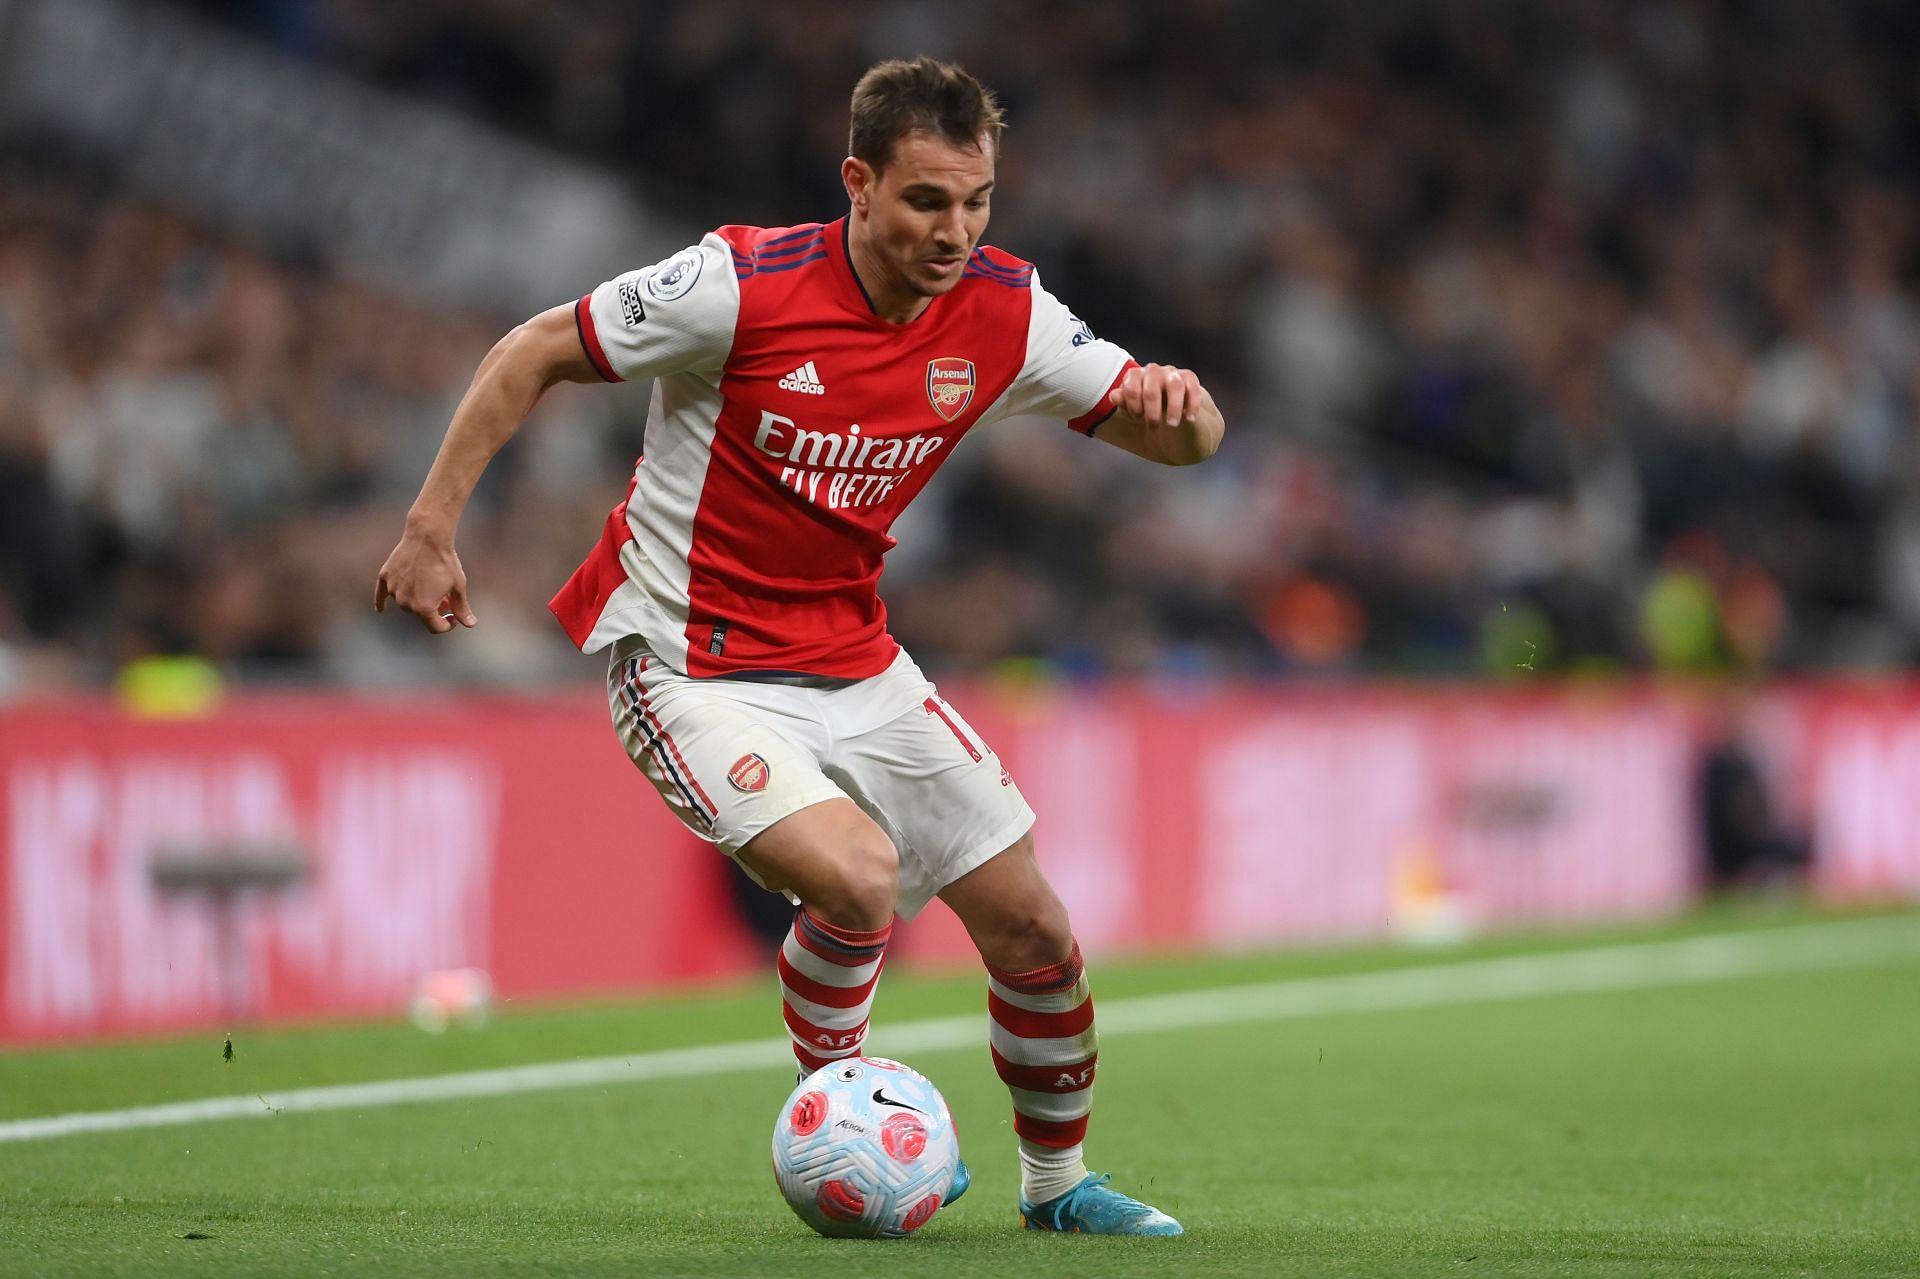 Premier League side failed to sign Arsenal defender Cedric Soares after showing late interest on Deadline Day